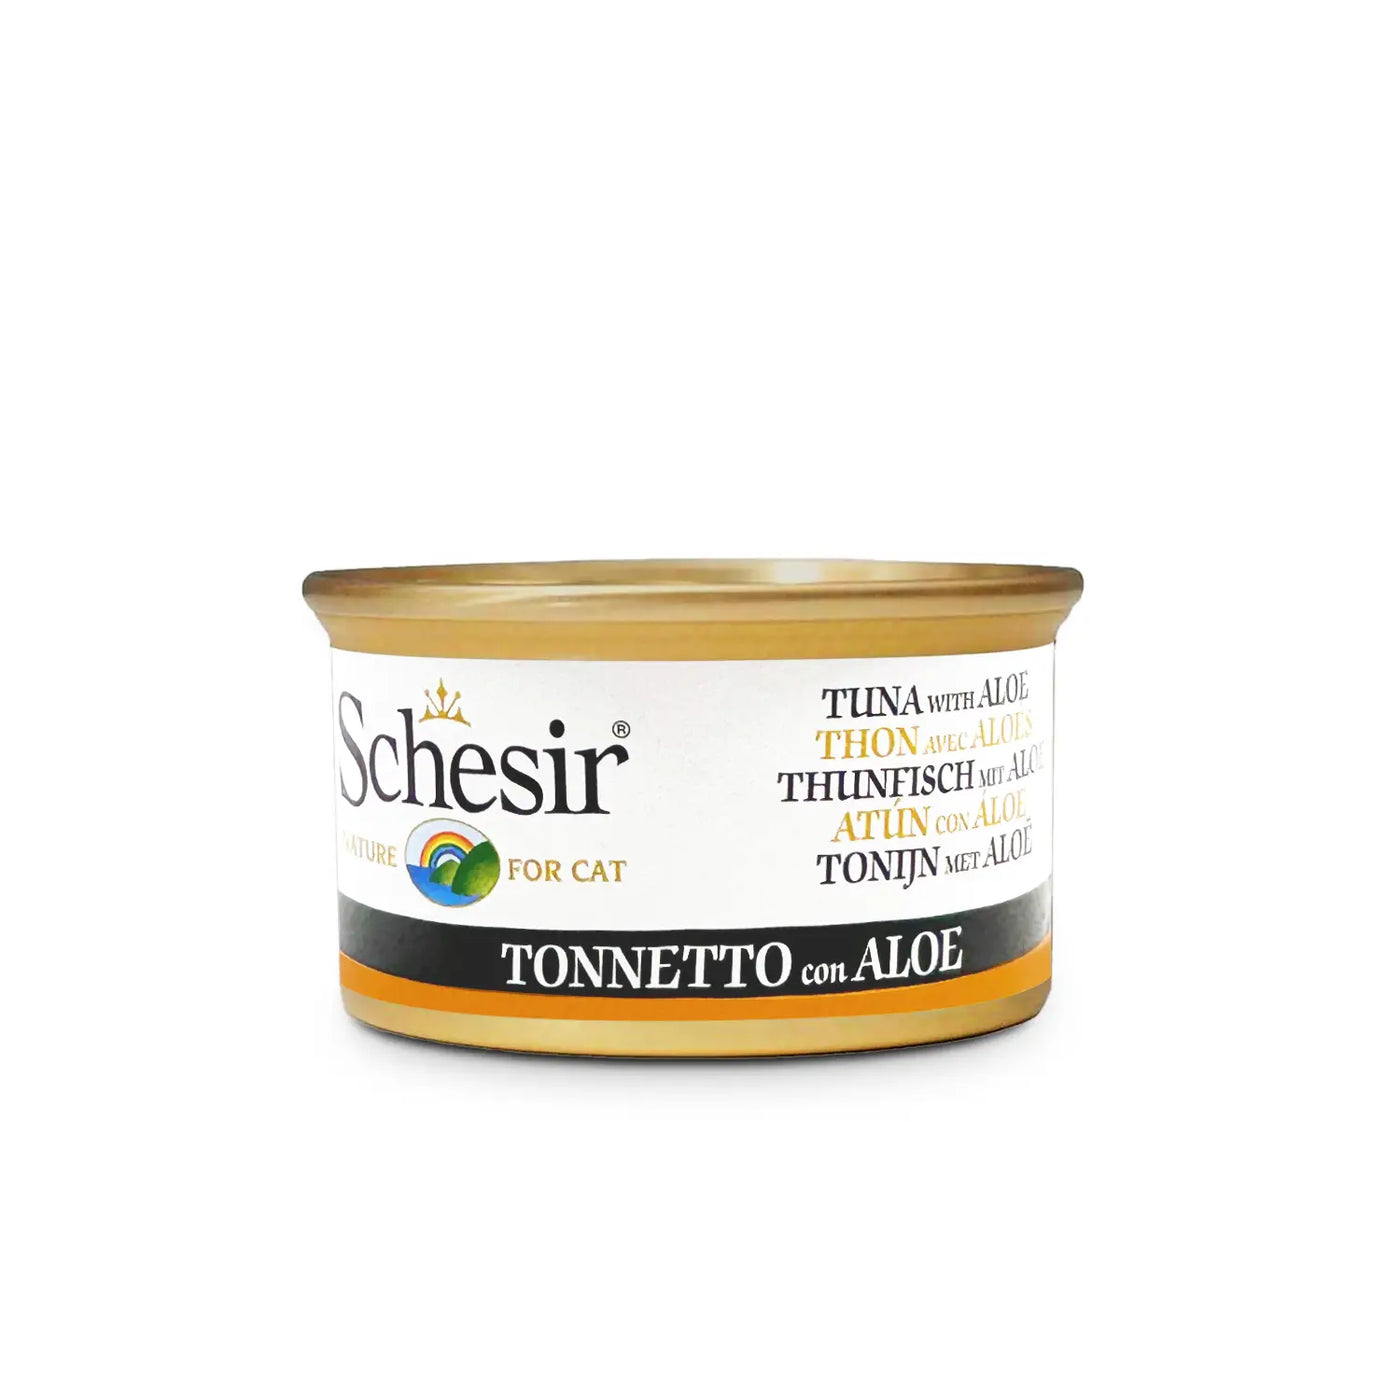 Schesir - Complementary Wet Food for Adult Cats - Tuna with Aloe 85g